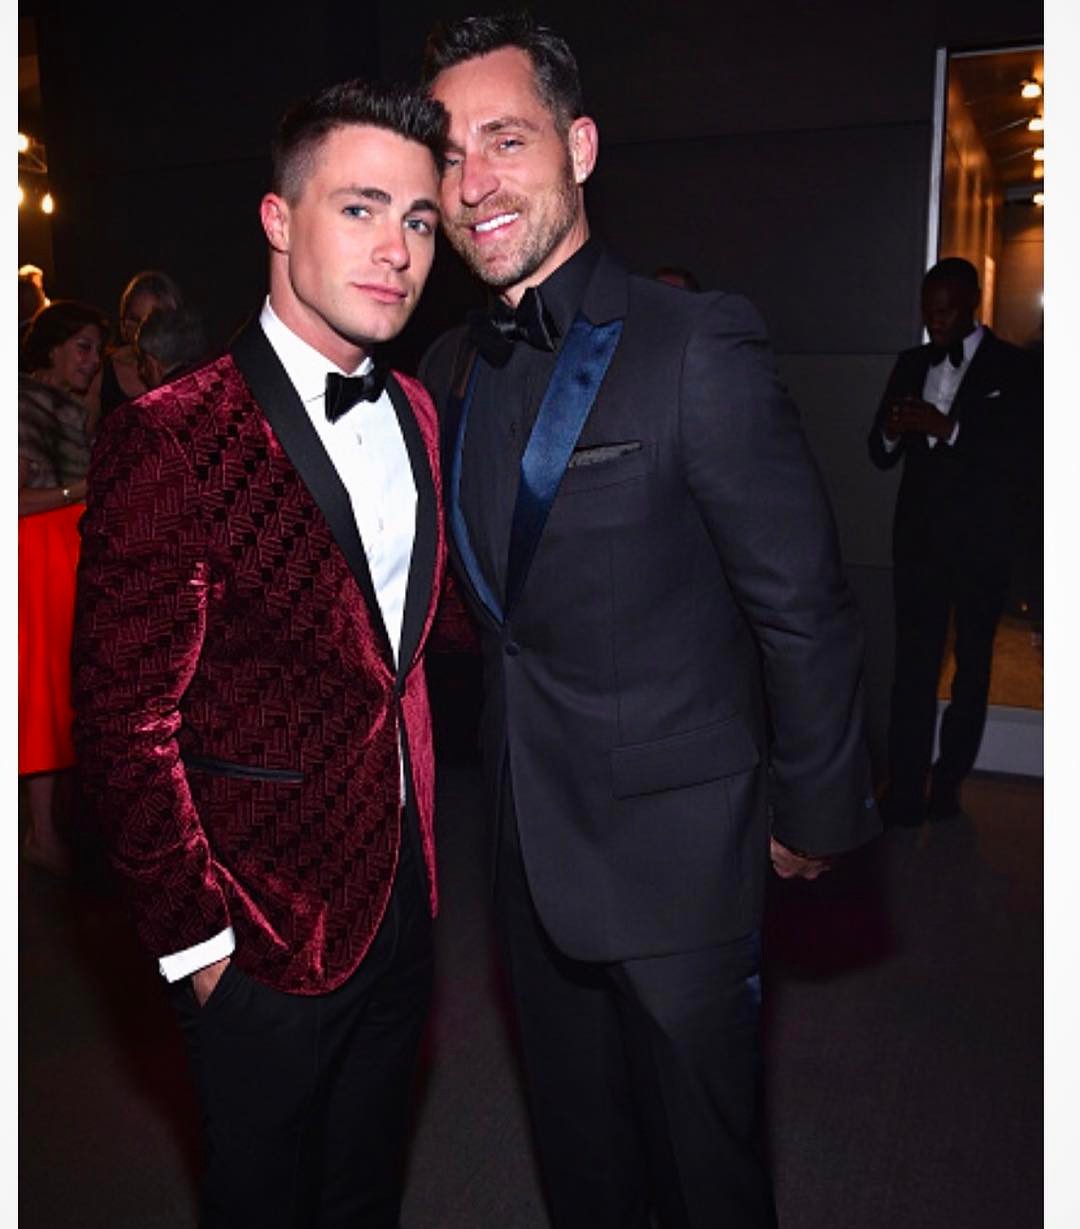 Celebrities : 10 Fun Facts About Colton Haynes’ Man, Jeff Leatham